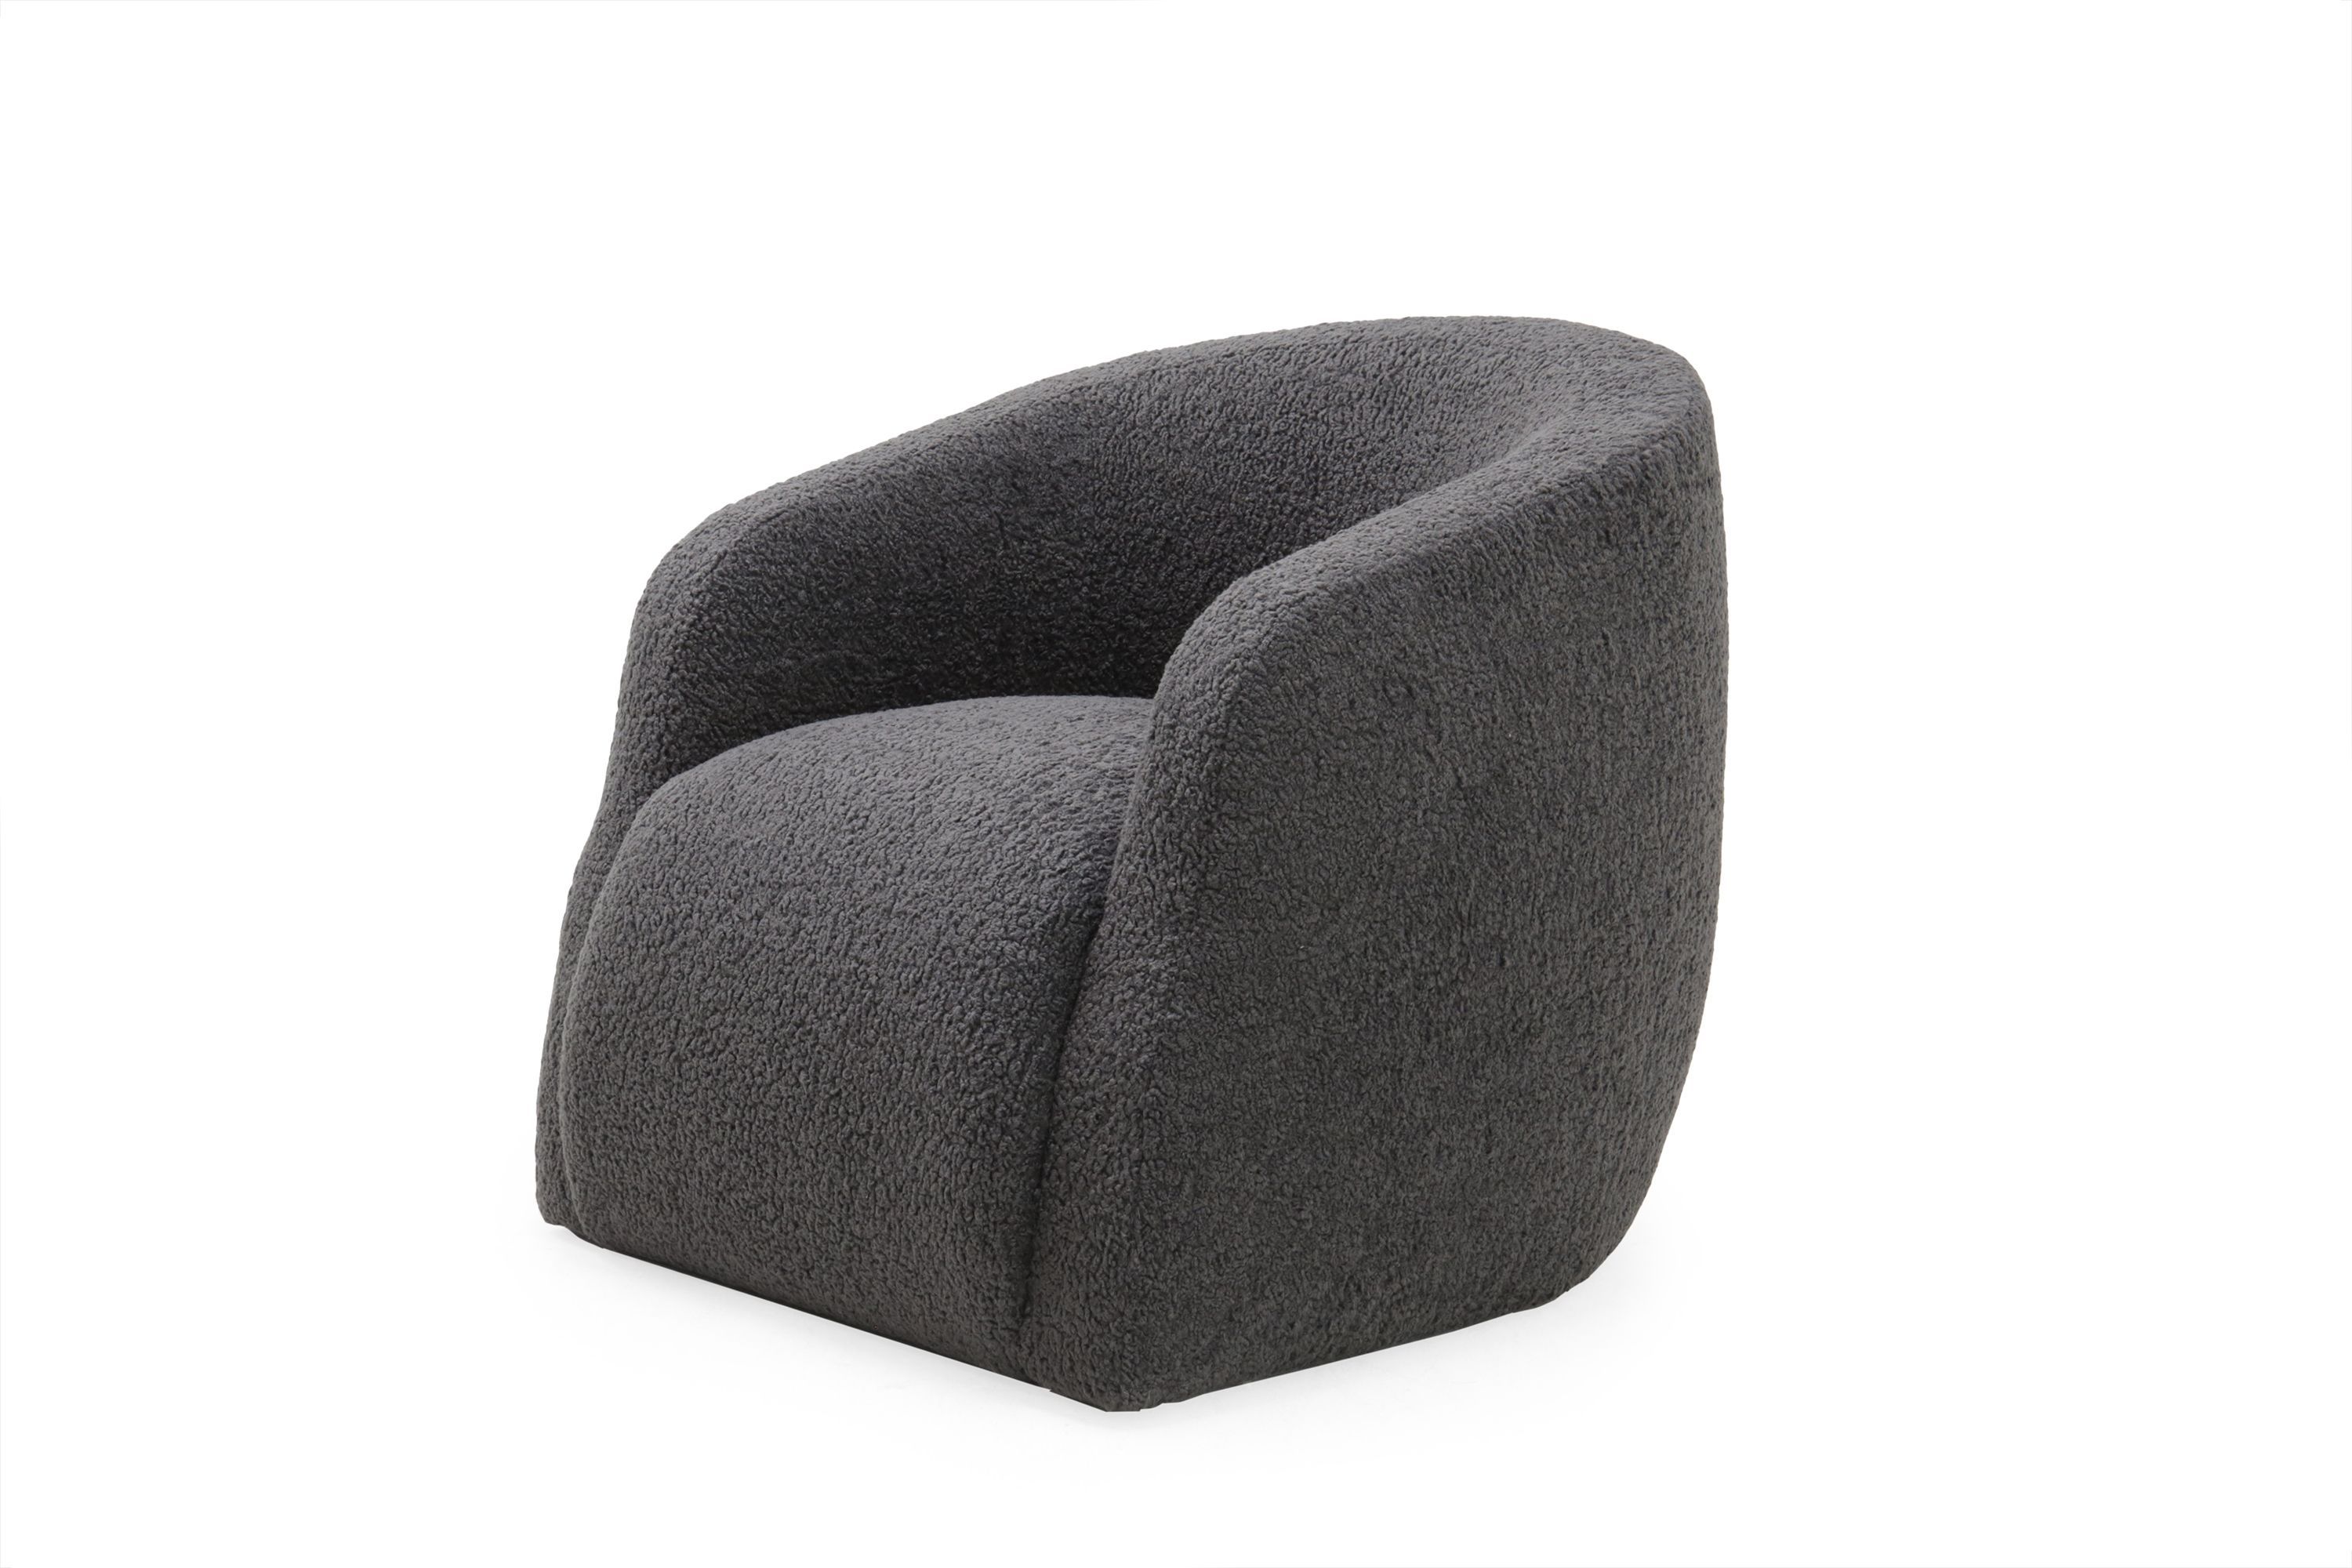 Verellen Theo Swivel Club Chair In Aires Charcoal | Fall 2017 Market Intended For Theo Ii Swivel Chairs (View 8 of 25)